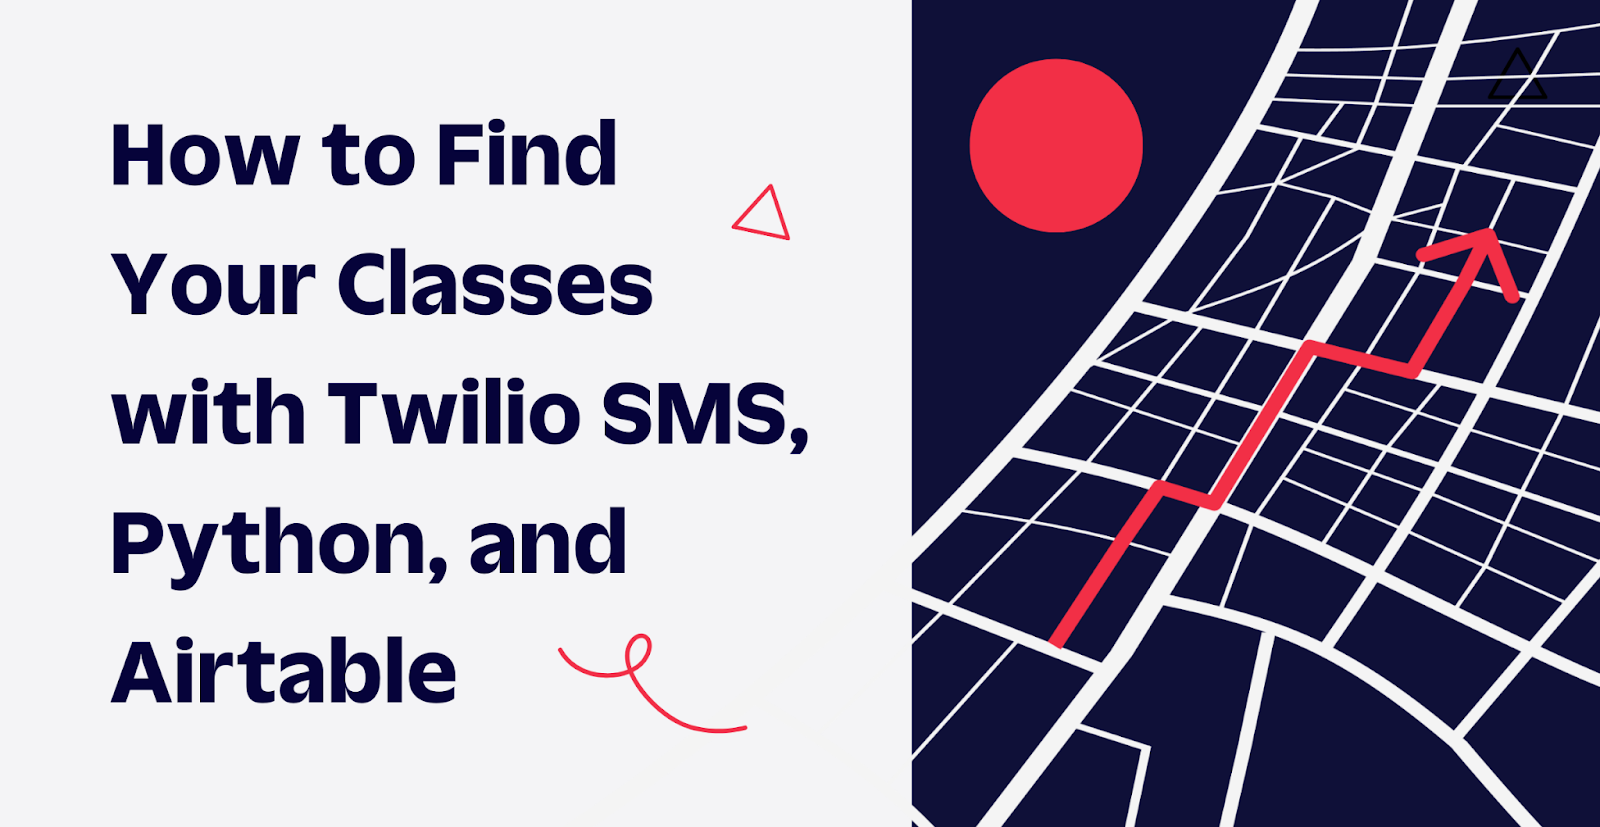 How to Find Your Classes with Twilio SMS, Python, and Airtable